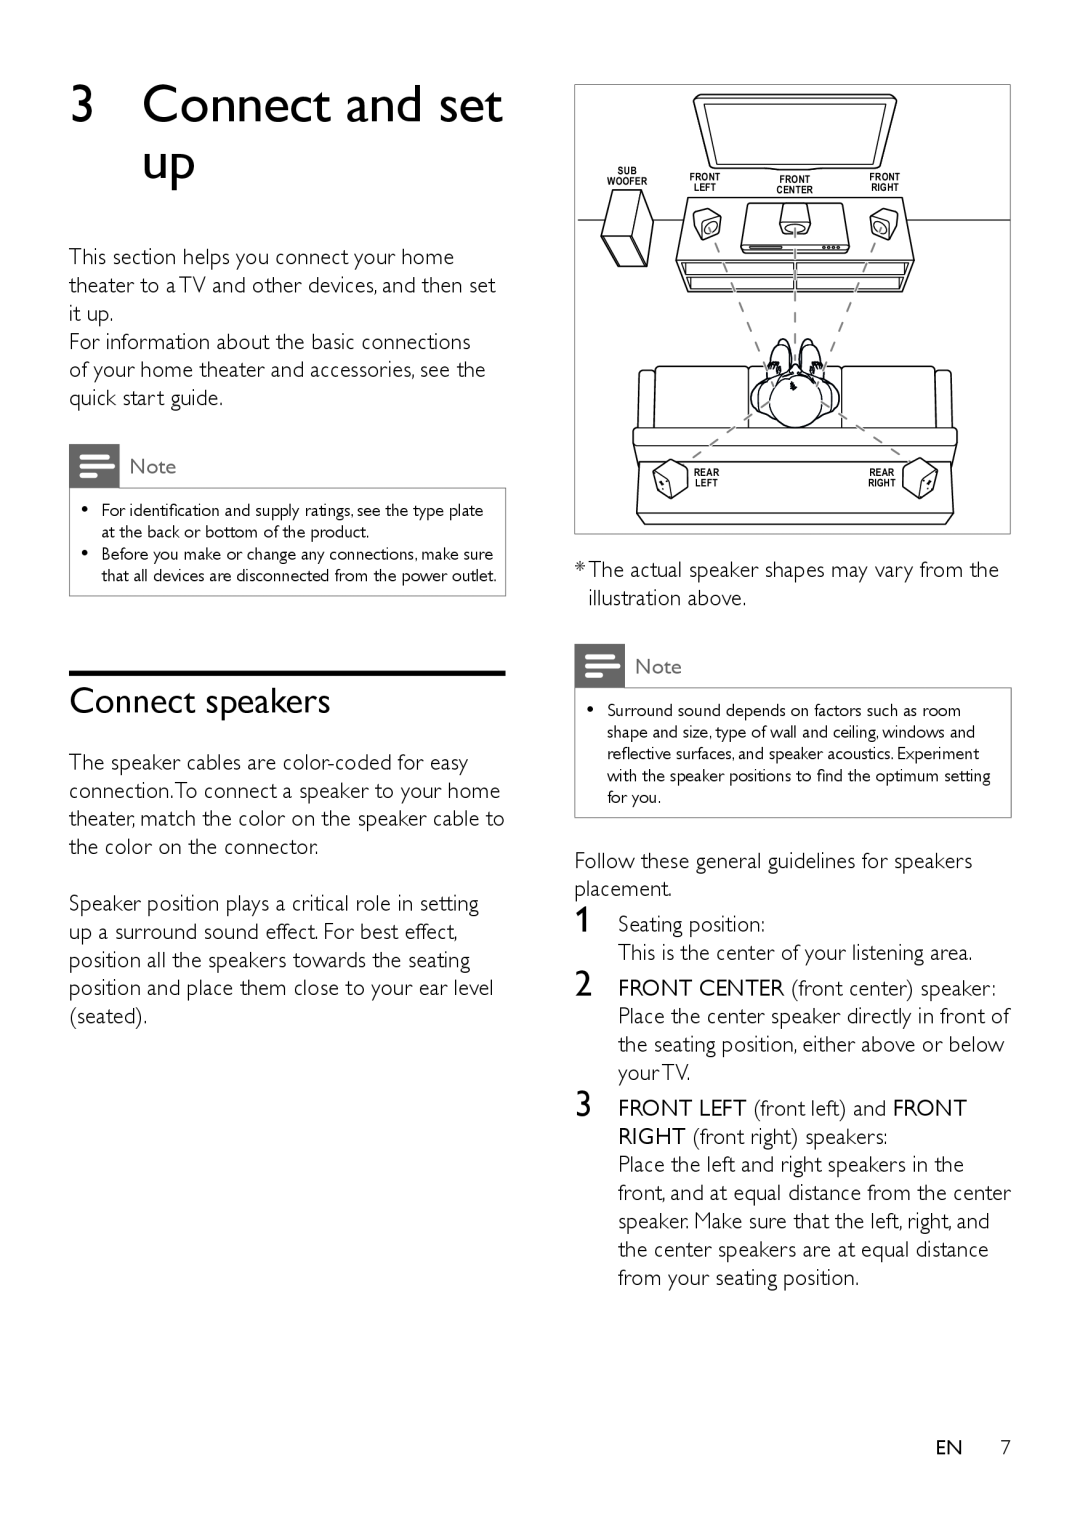 Philips HTD3570, HTD3540, HTD3510 user manual 3Connect and set up, Connect speakers 